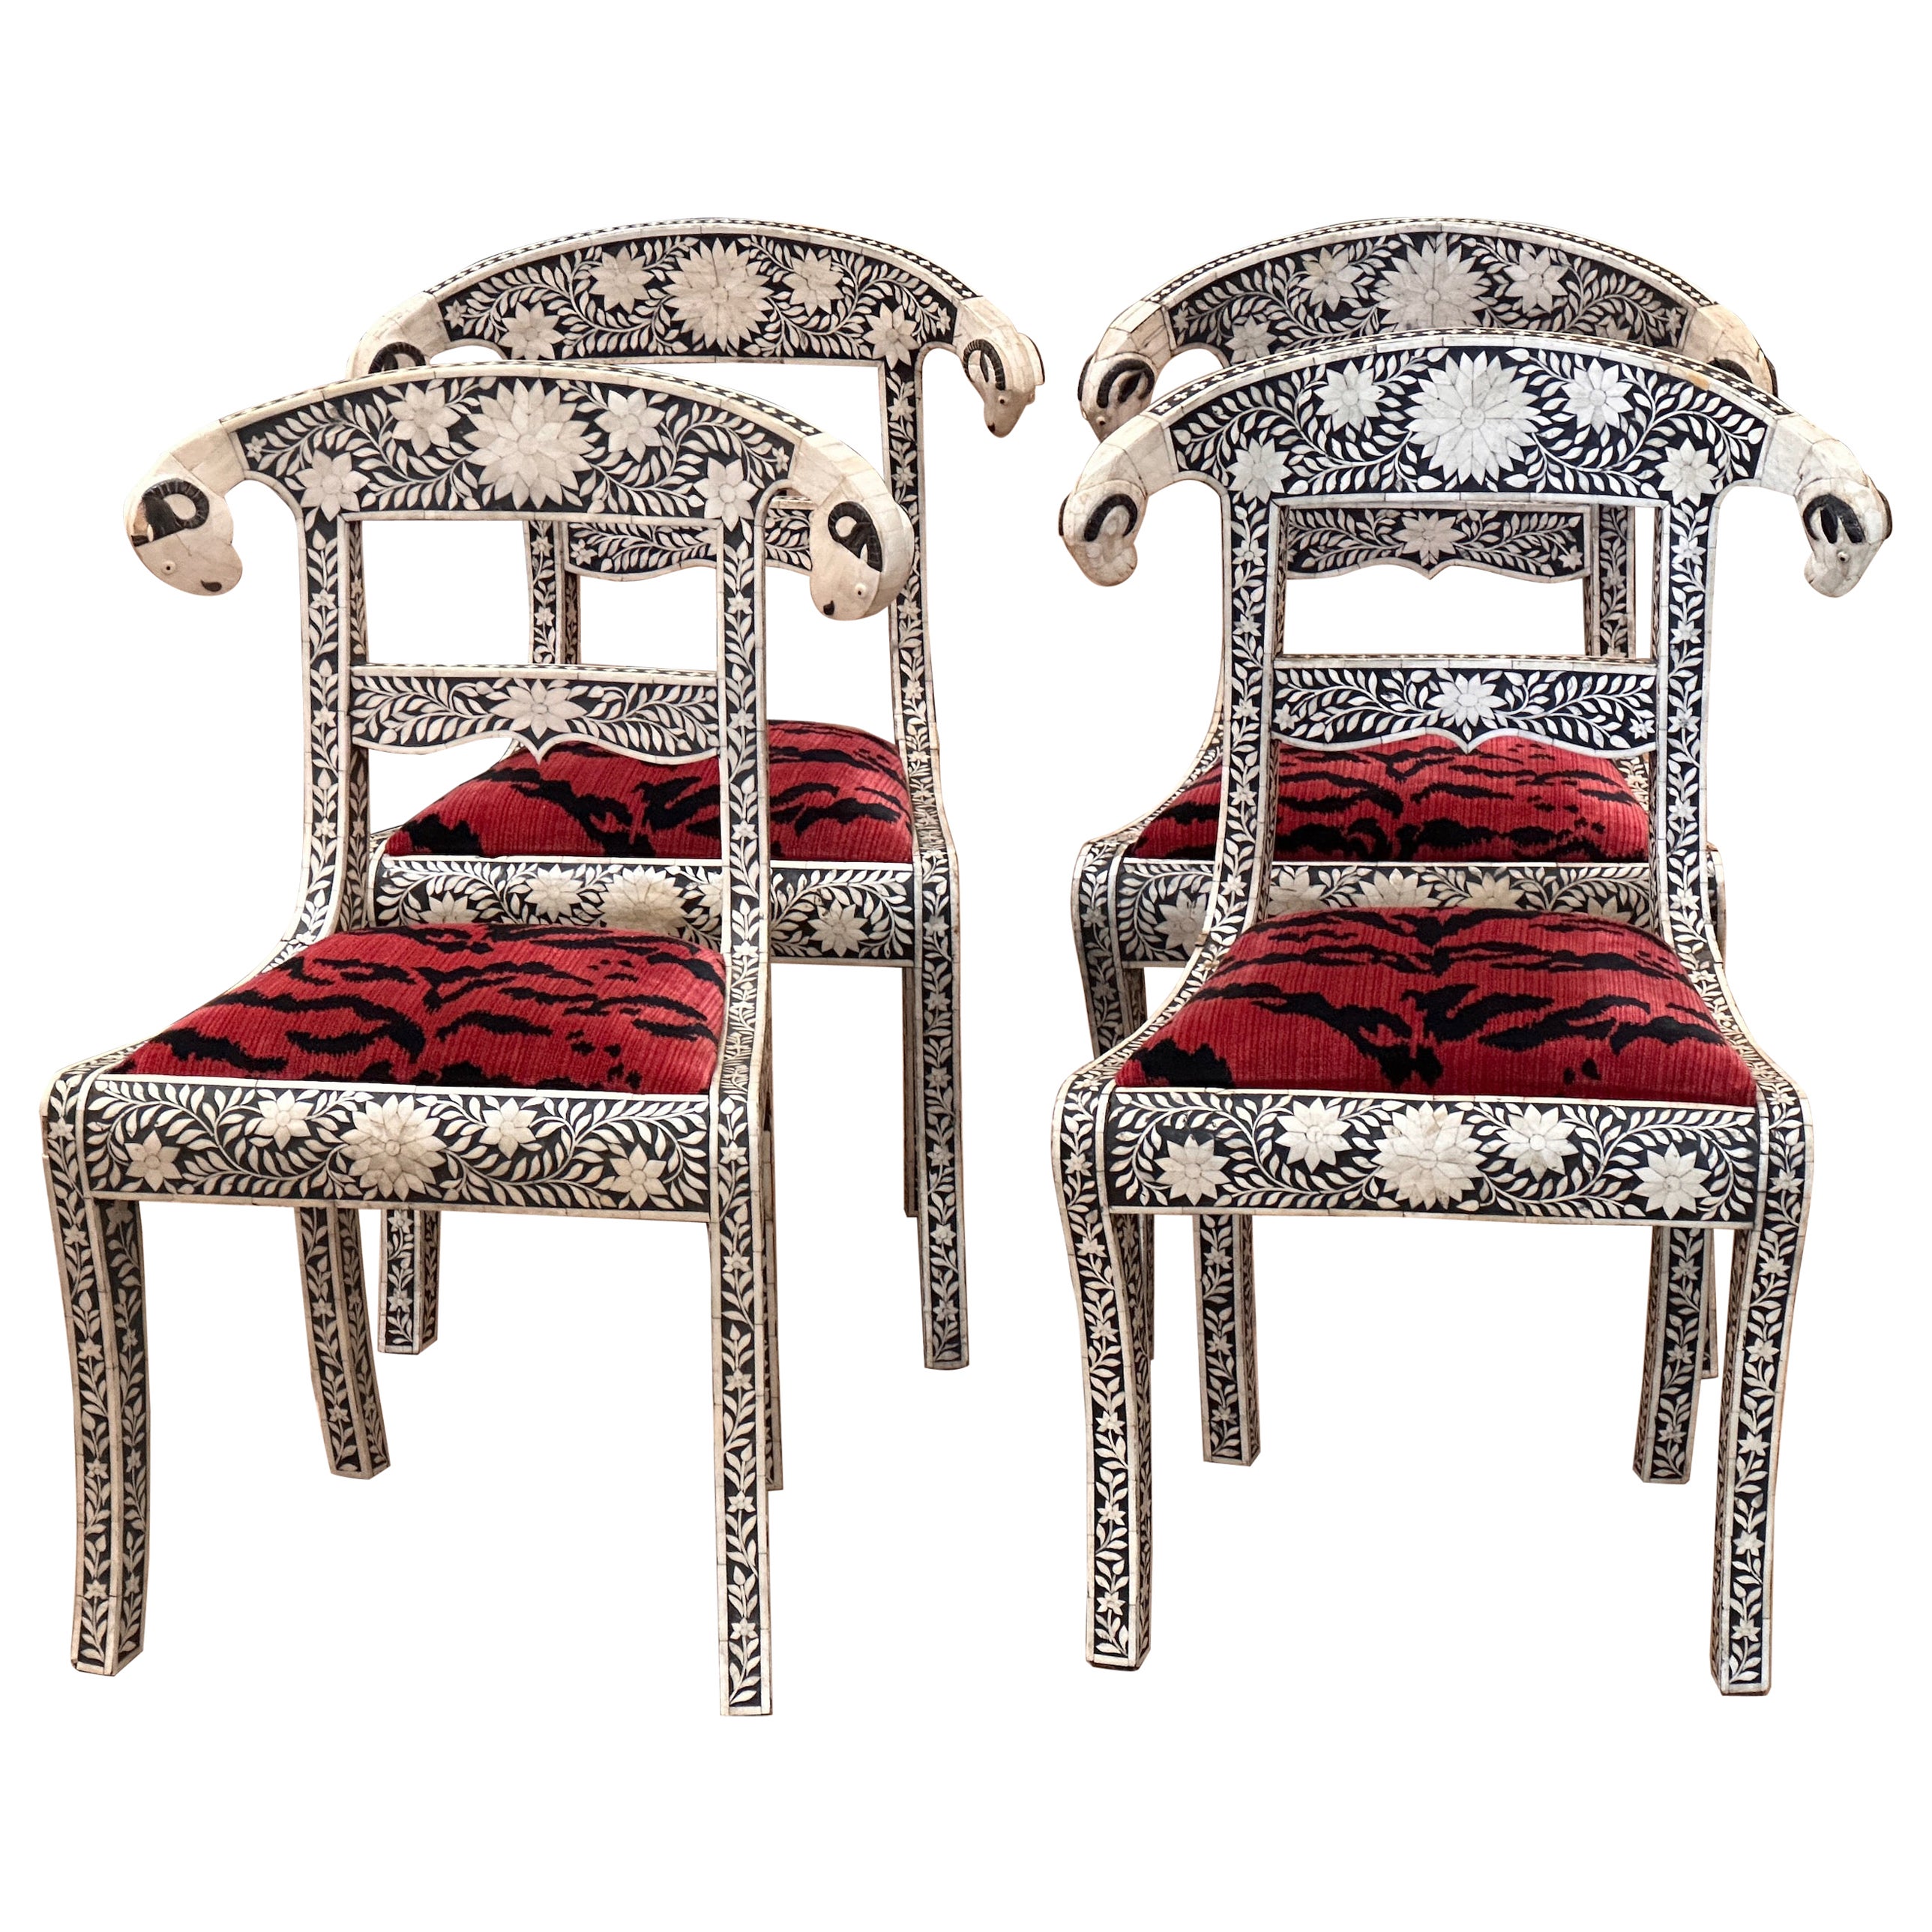 Set of Four Anglo-Indian Bone and Ebony Inlaid Sidechairs